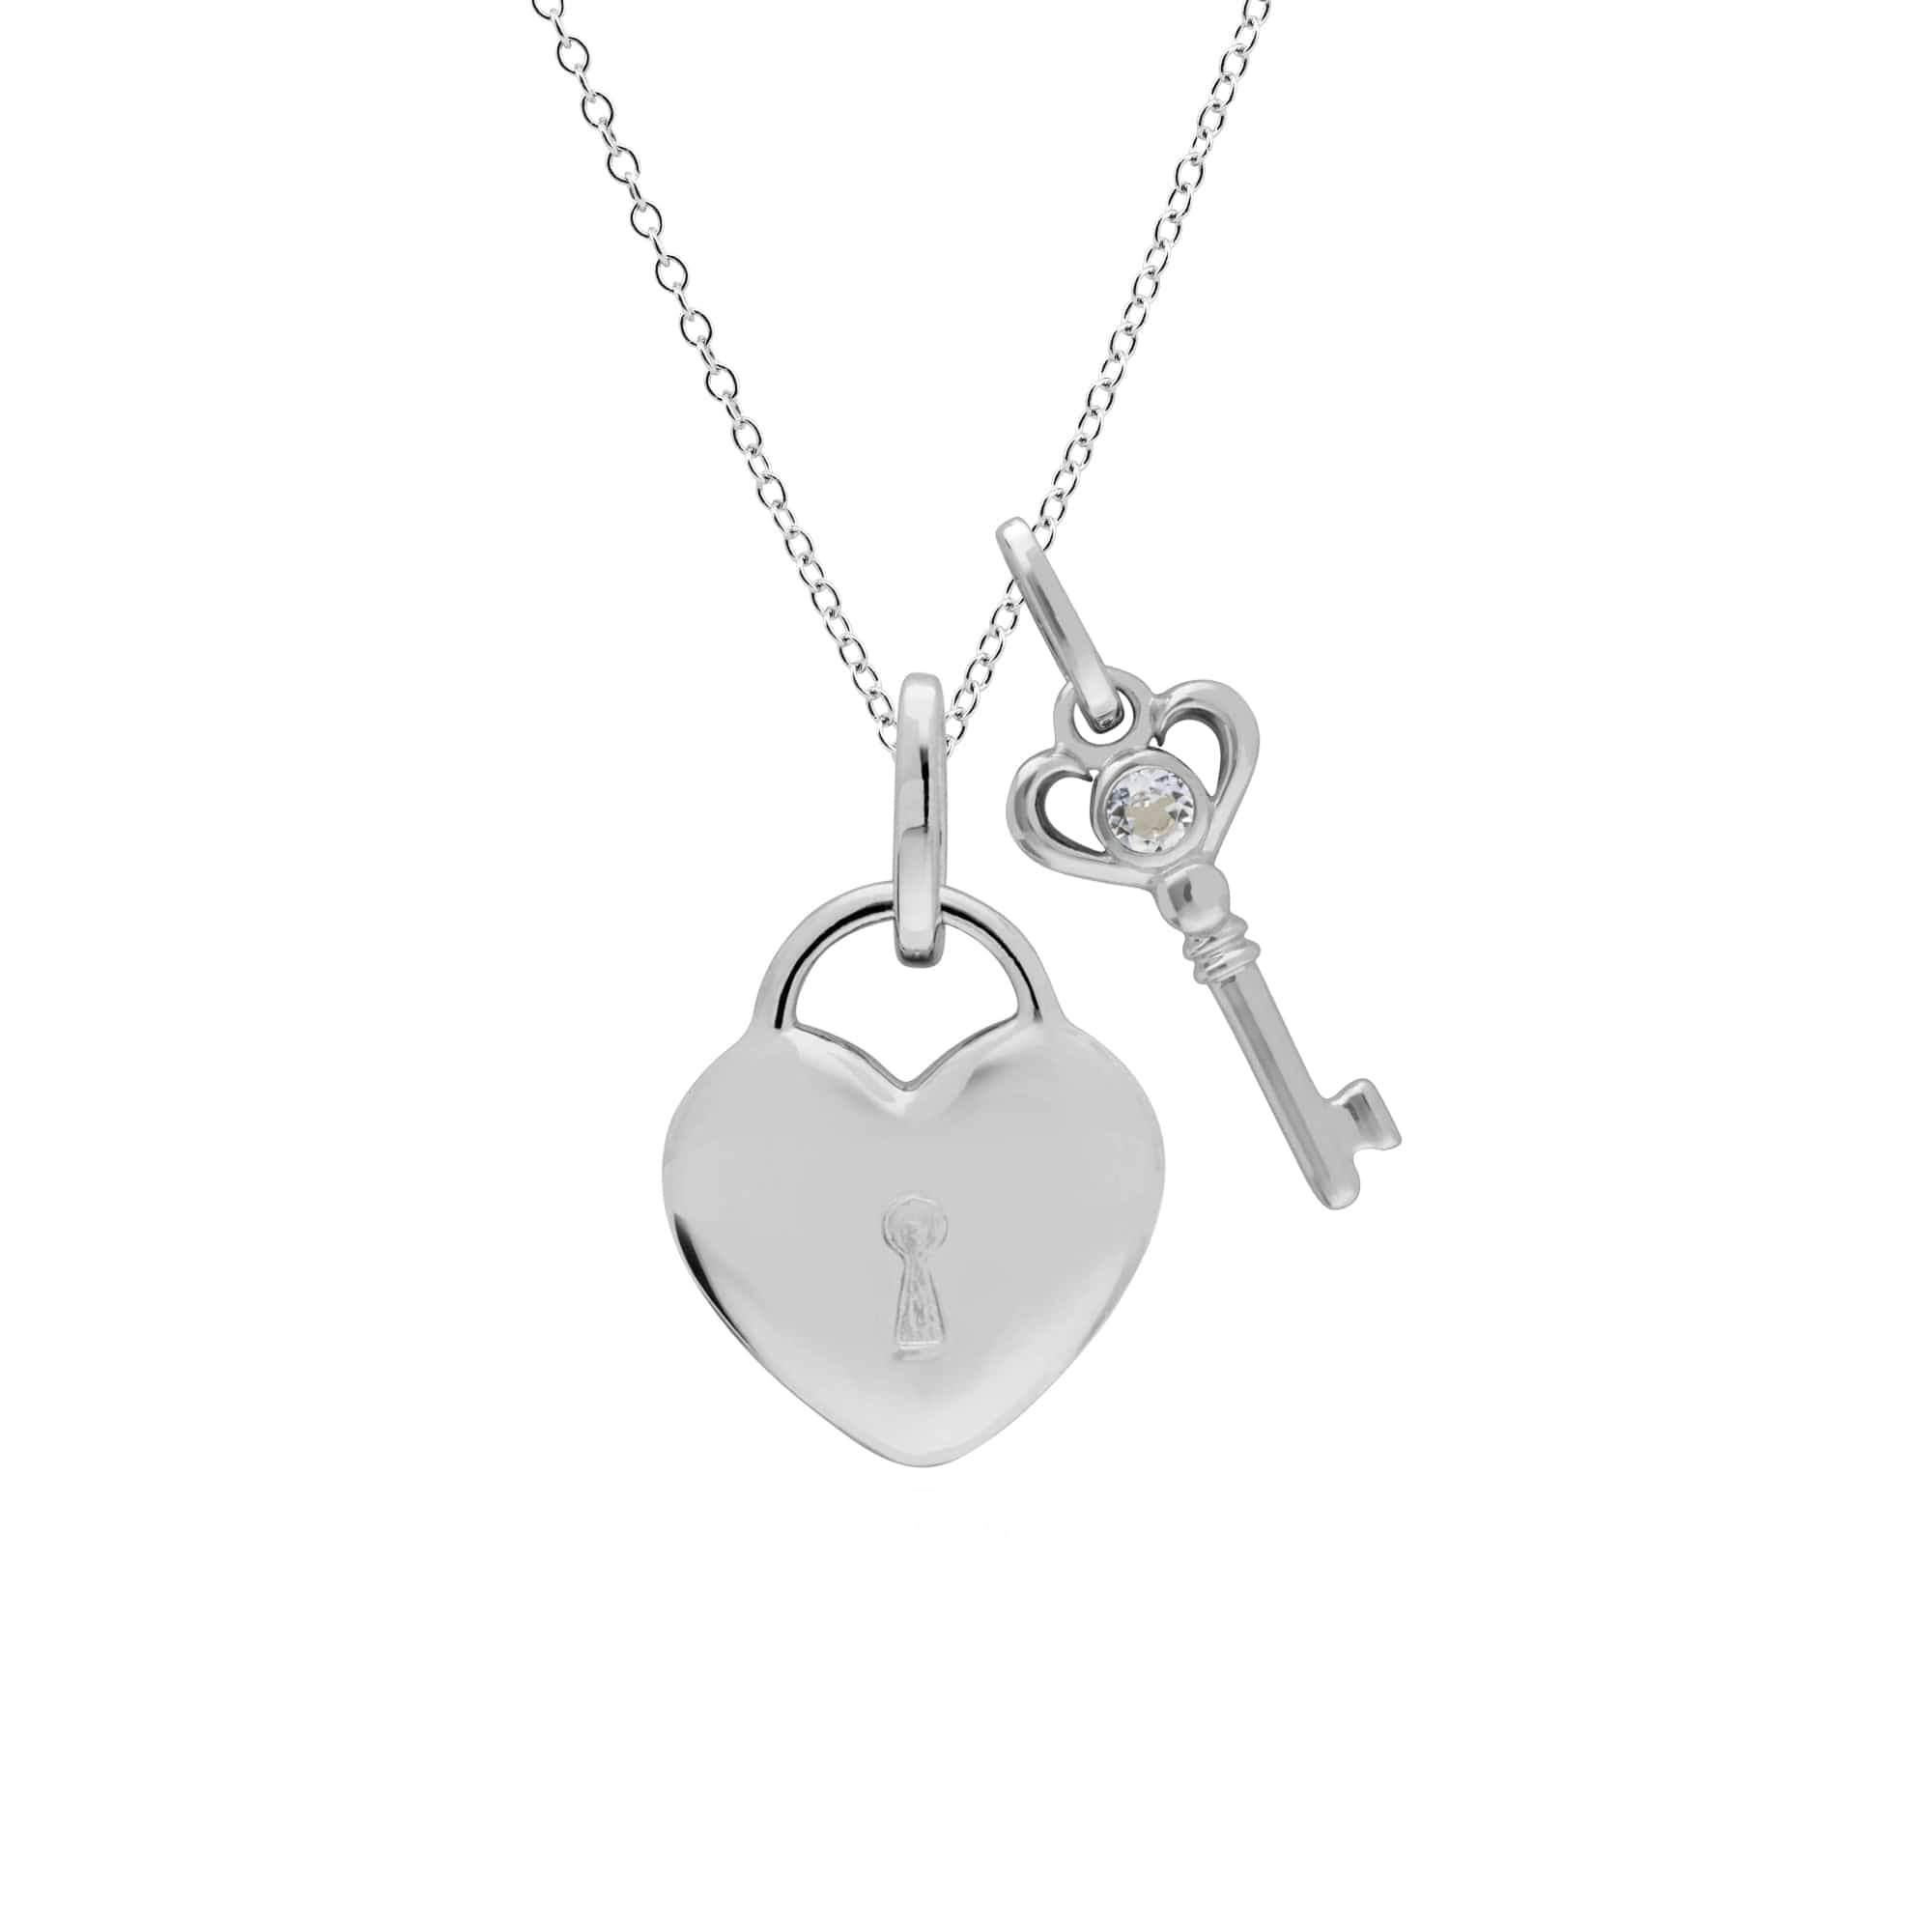 270P026409925-270P027001925 Classic Heart Lock Pendant & Clear Topaz Key Charm in 925 Sterling Silver 1